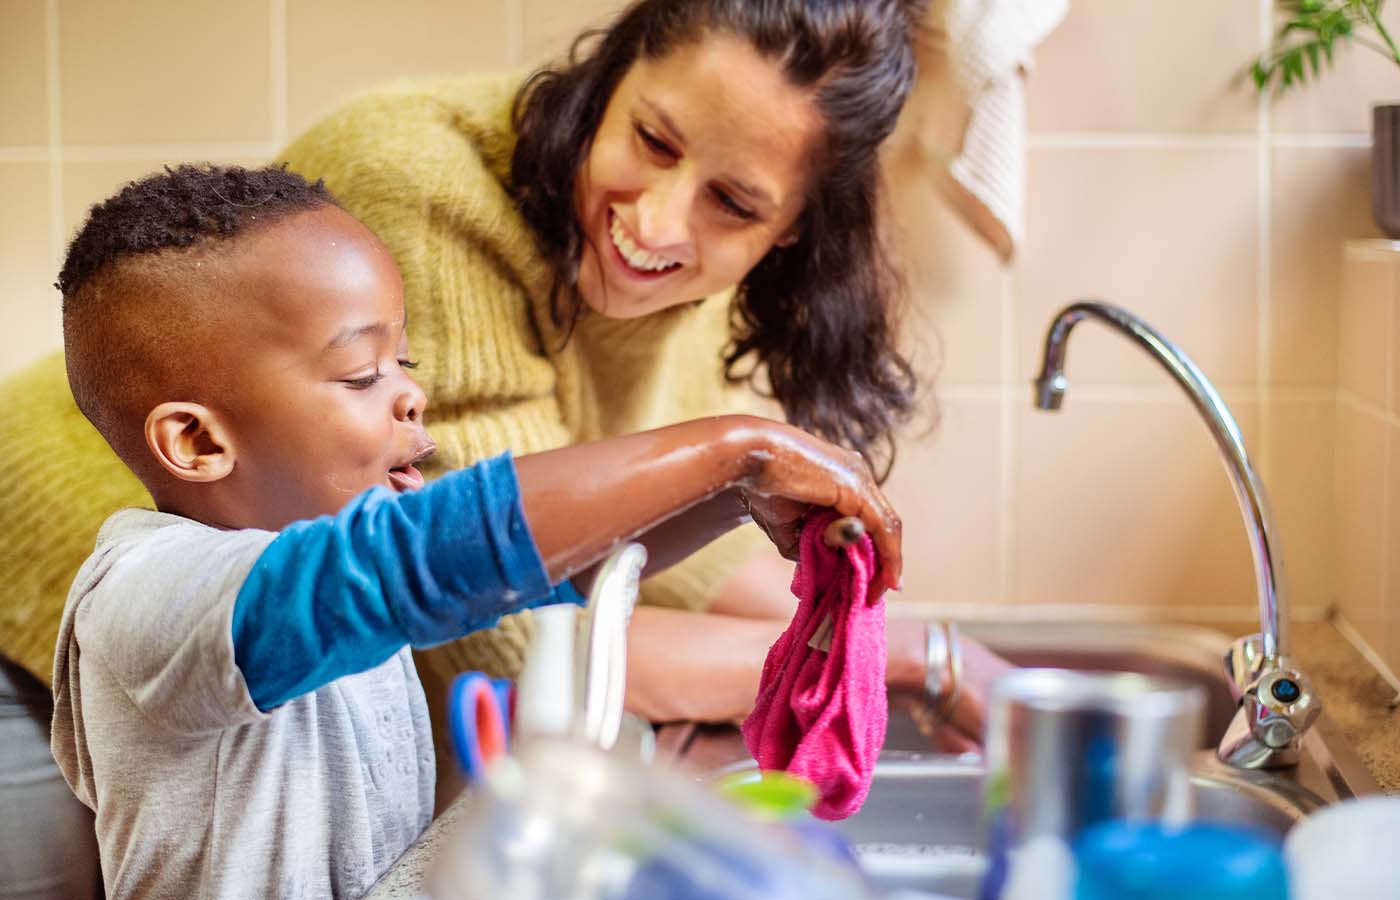 young boy helping his foster mom wash dishes